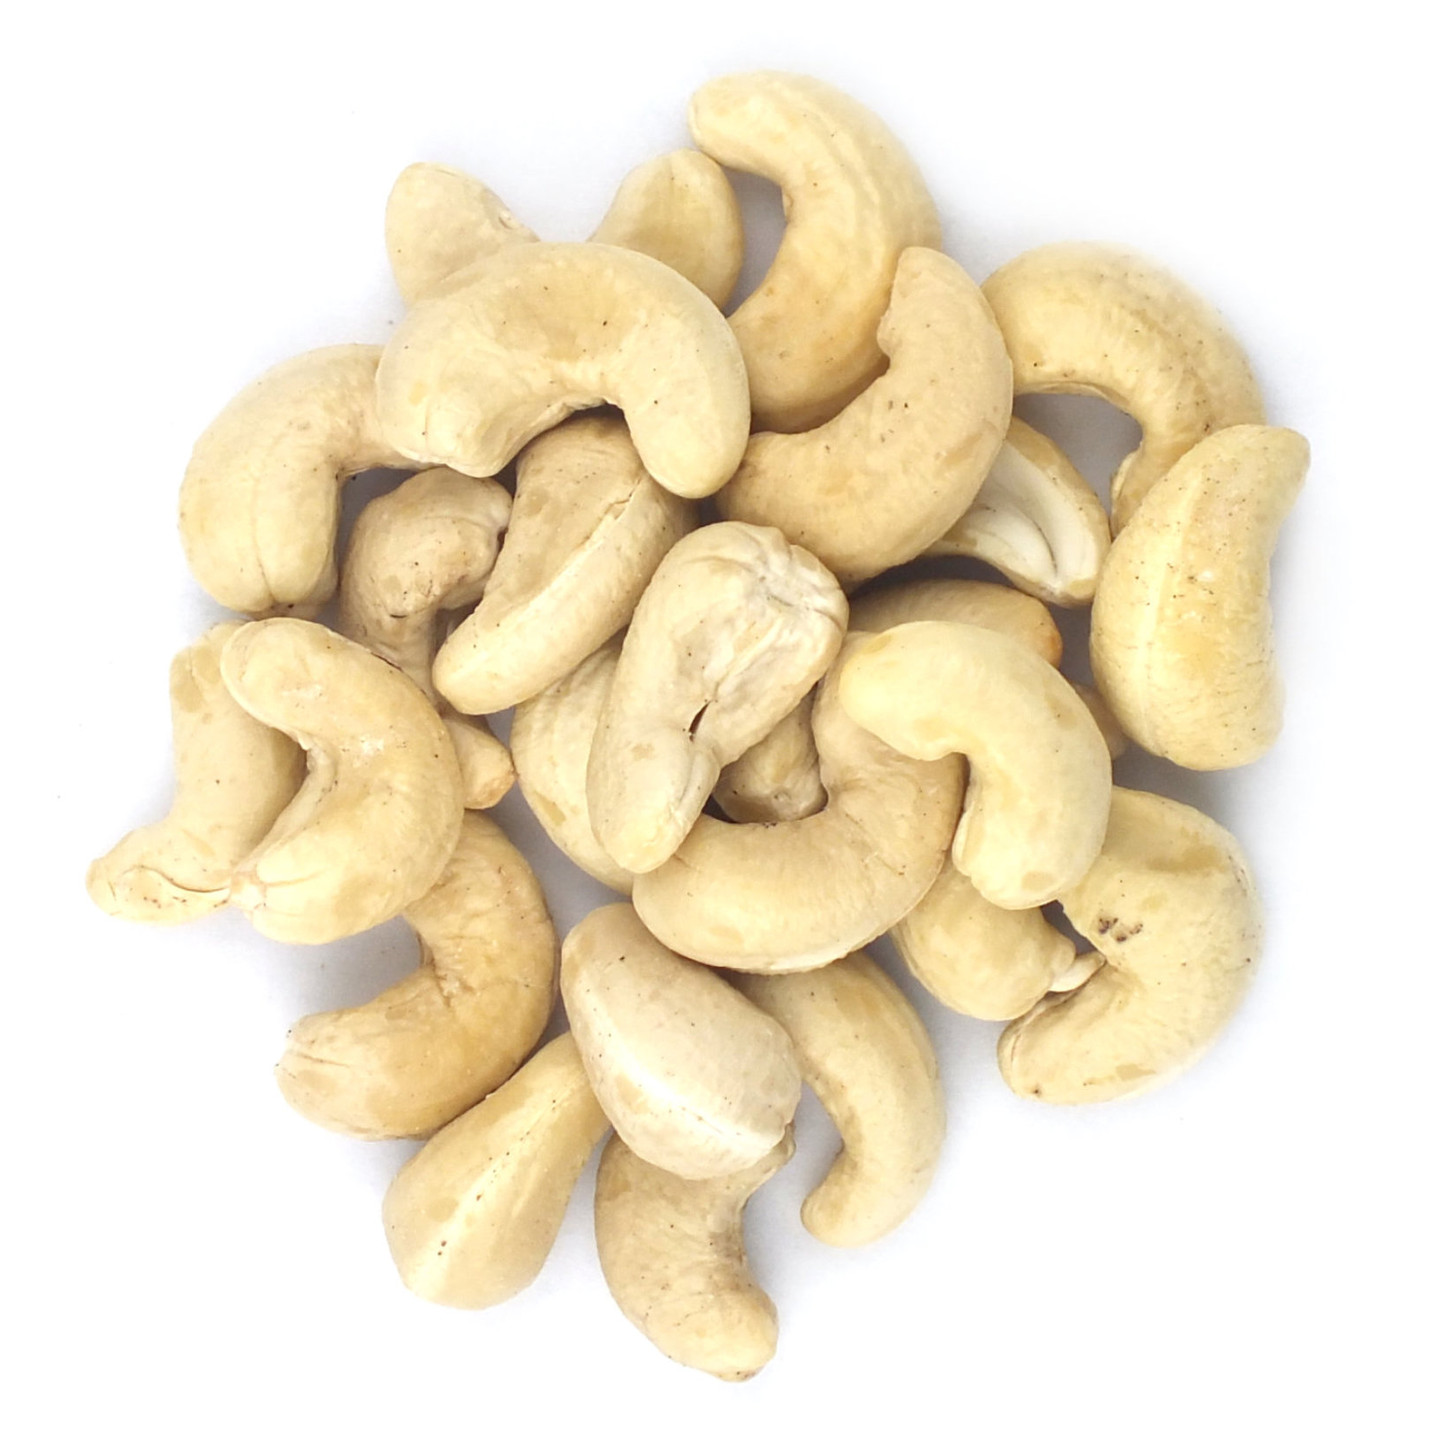  available cashew